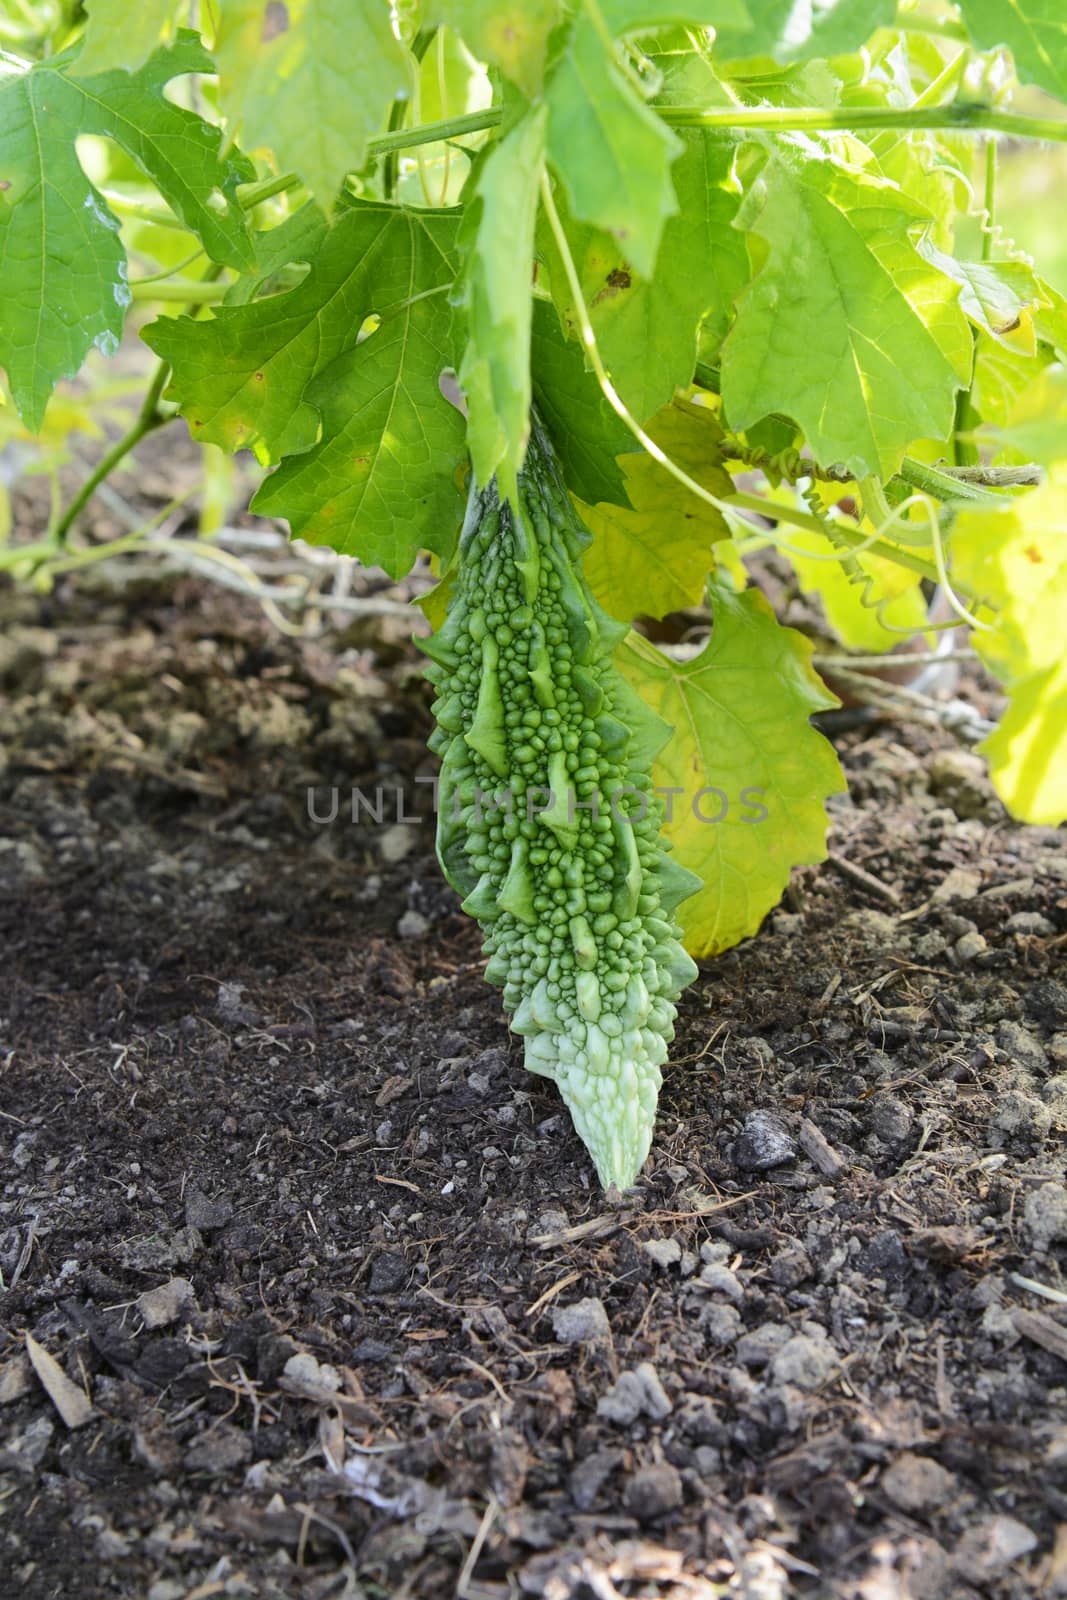 Balsam pear - bitter melon - hangs among green foliage of a leafy vine, growing on a trellis